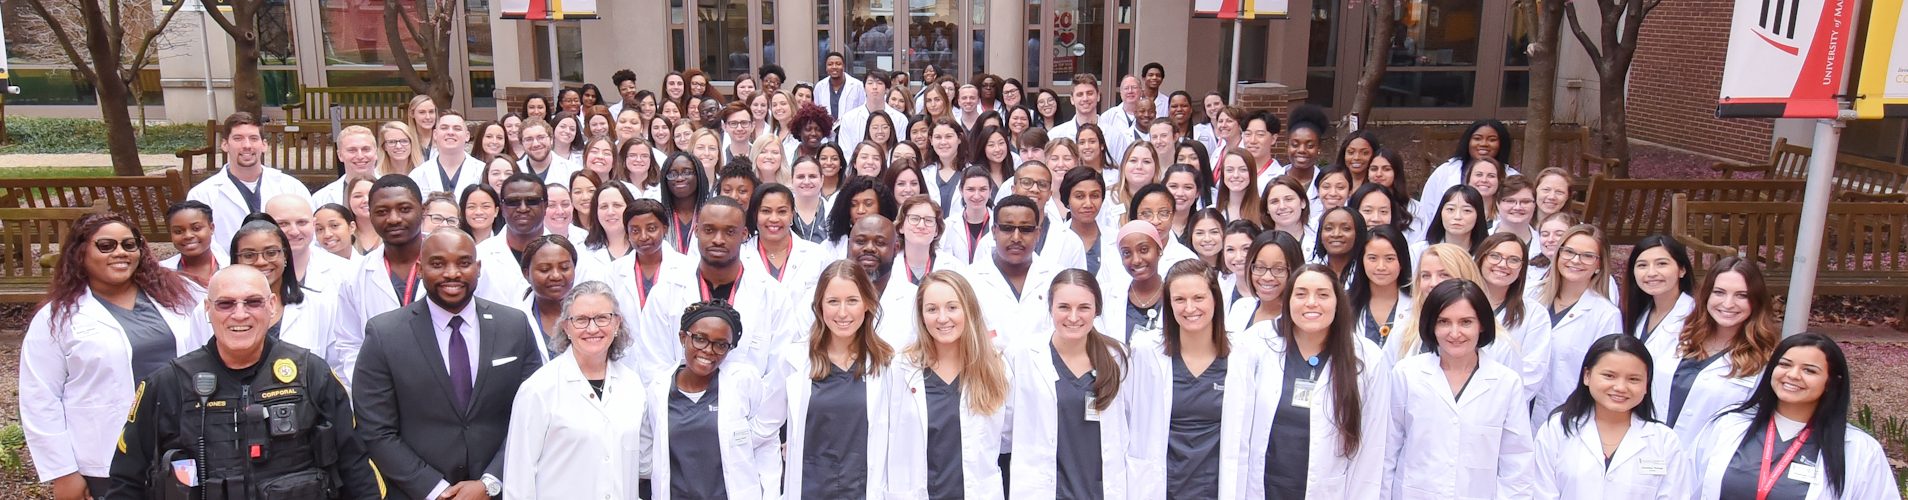 The spring 2019 White Coat Ceremony at the School of Nursing